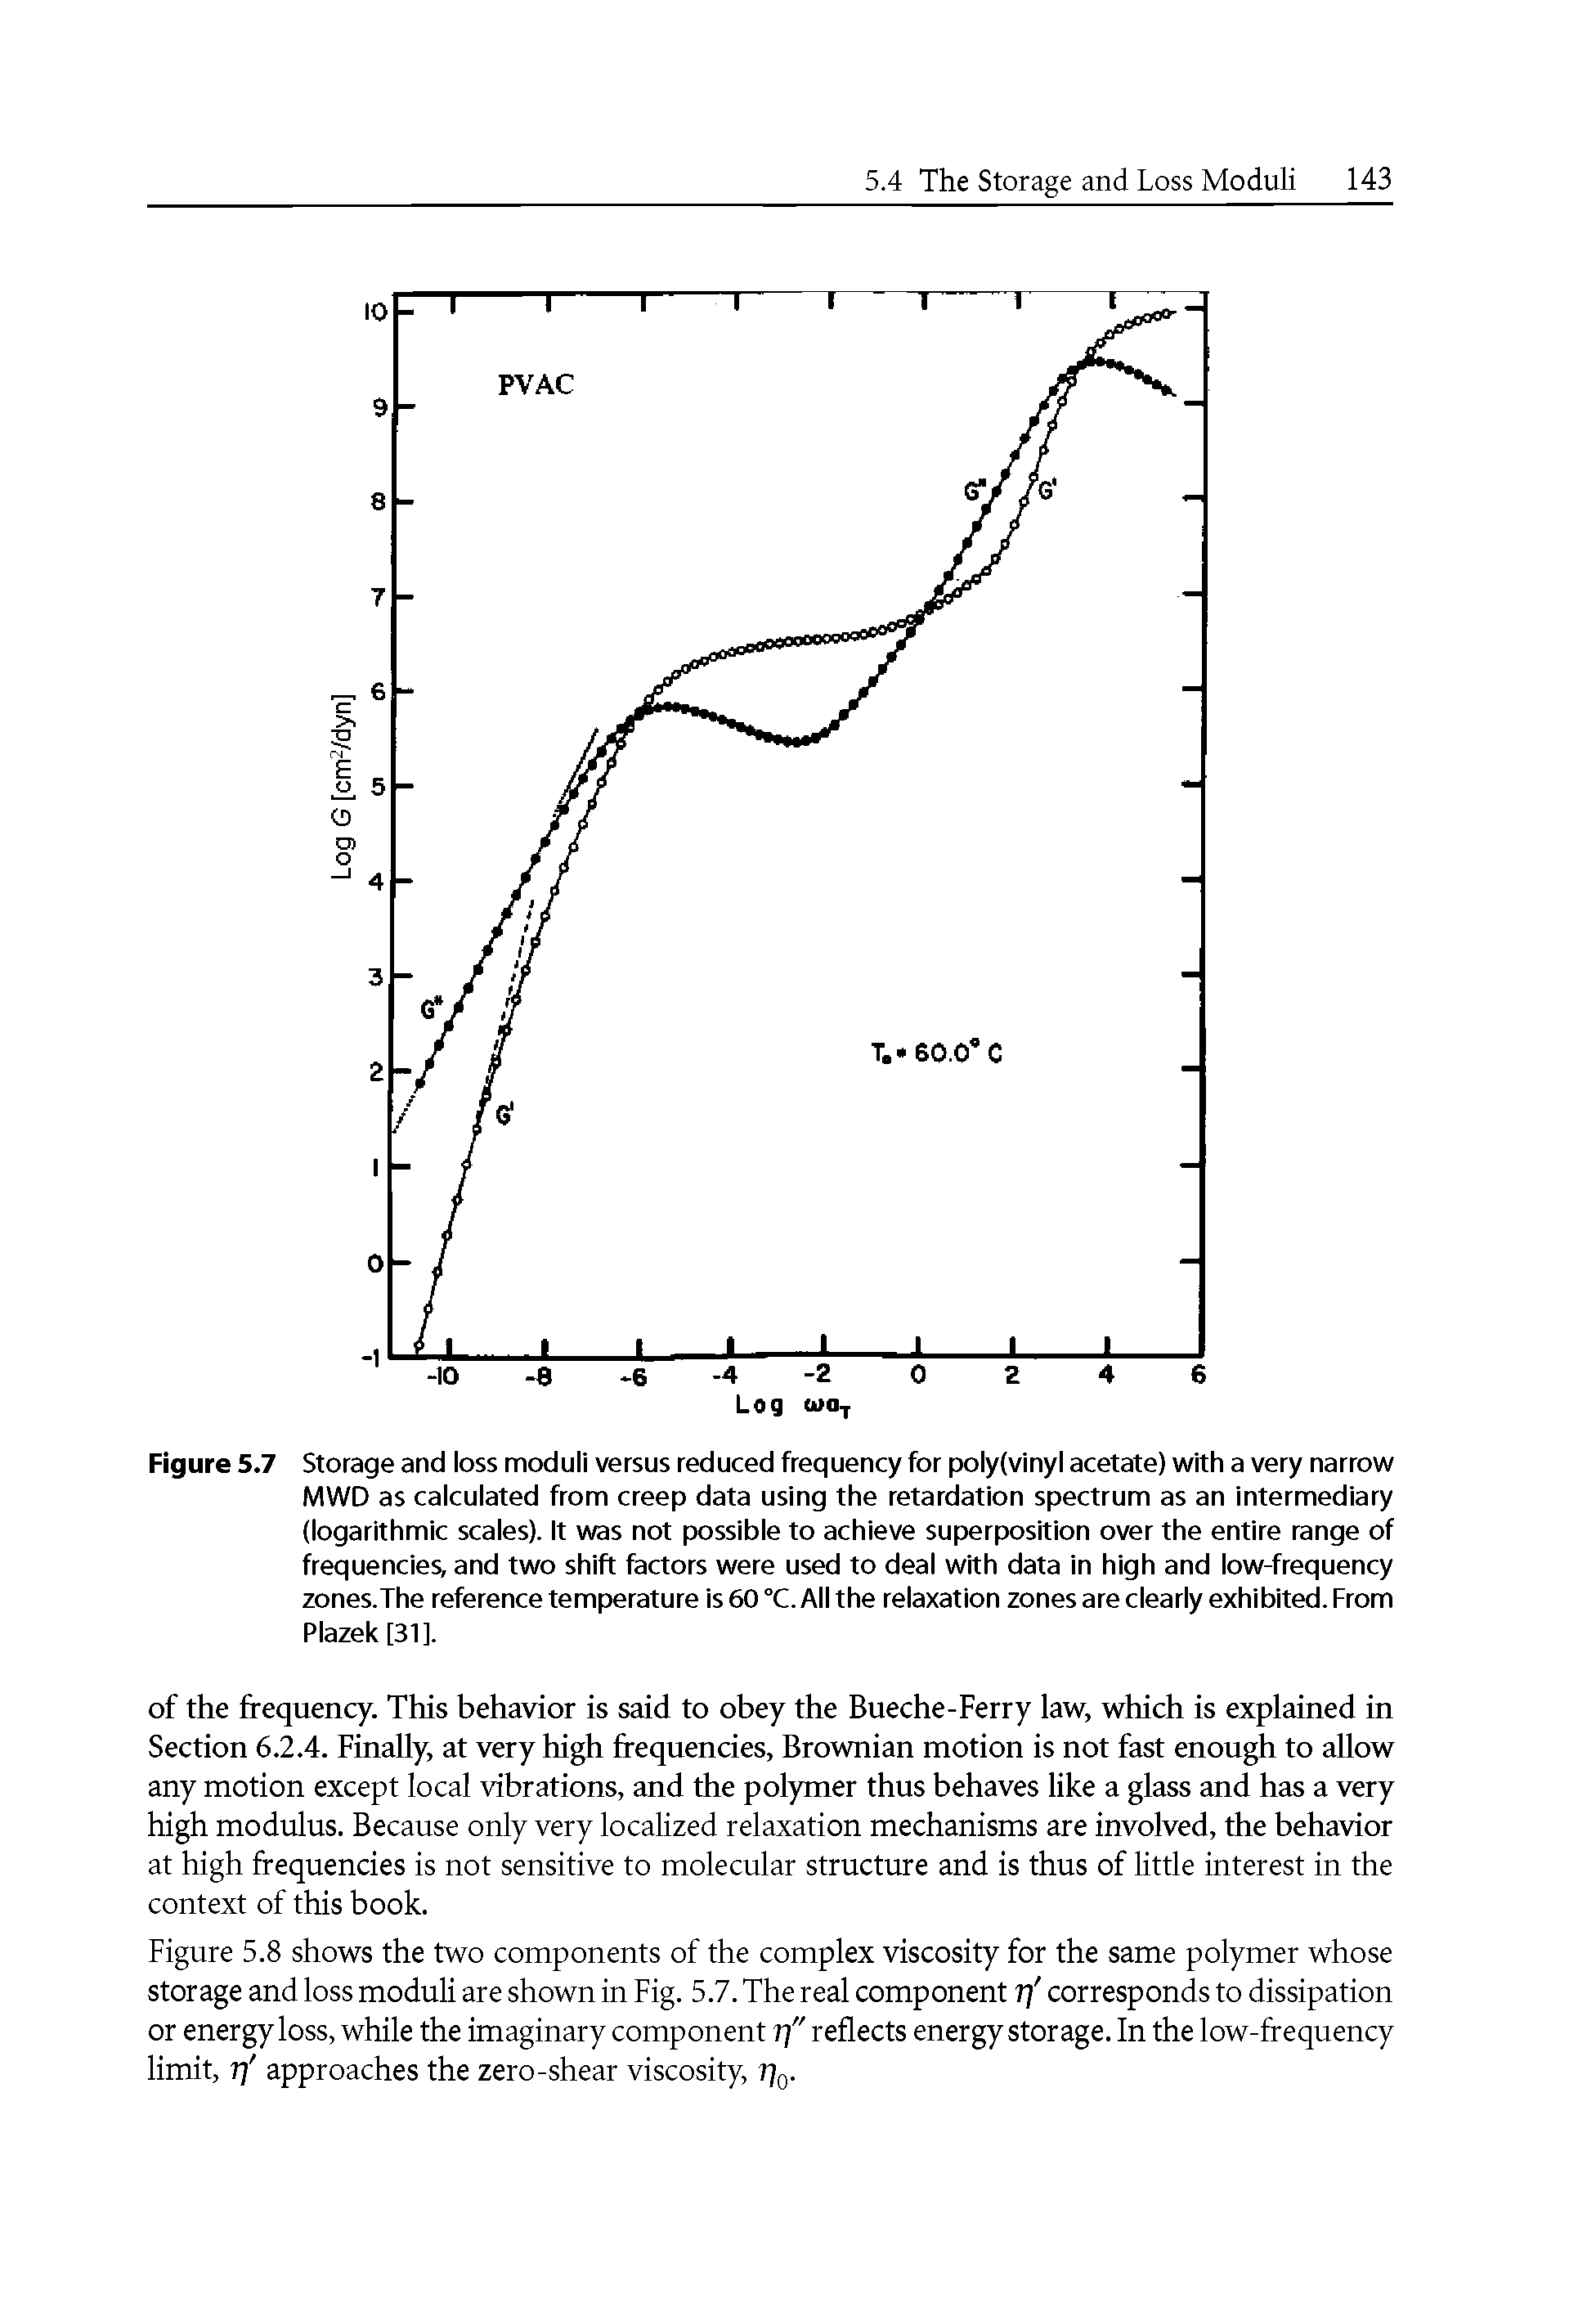 Figure 5.7 Storage and loss moduli versus reduced frequency for poly(vinyl acetate) with a very narrow MWD as calculated from creep data using the retardation spectrum as an intermediary (logarithmic scales). It was not possible to achieve superposition over the entire range of frequencies, and two shift factors were used to deal with data in high and low-frequency zones.The reference temperature is 60 °C. All the relaxation zones are clearly exhibited. From Plazek [31].